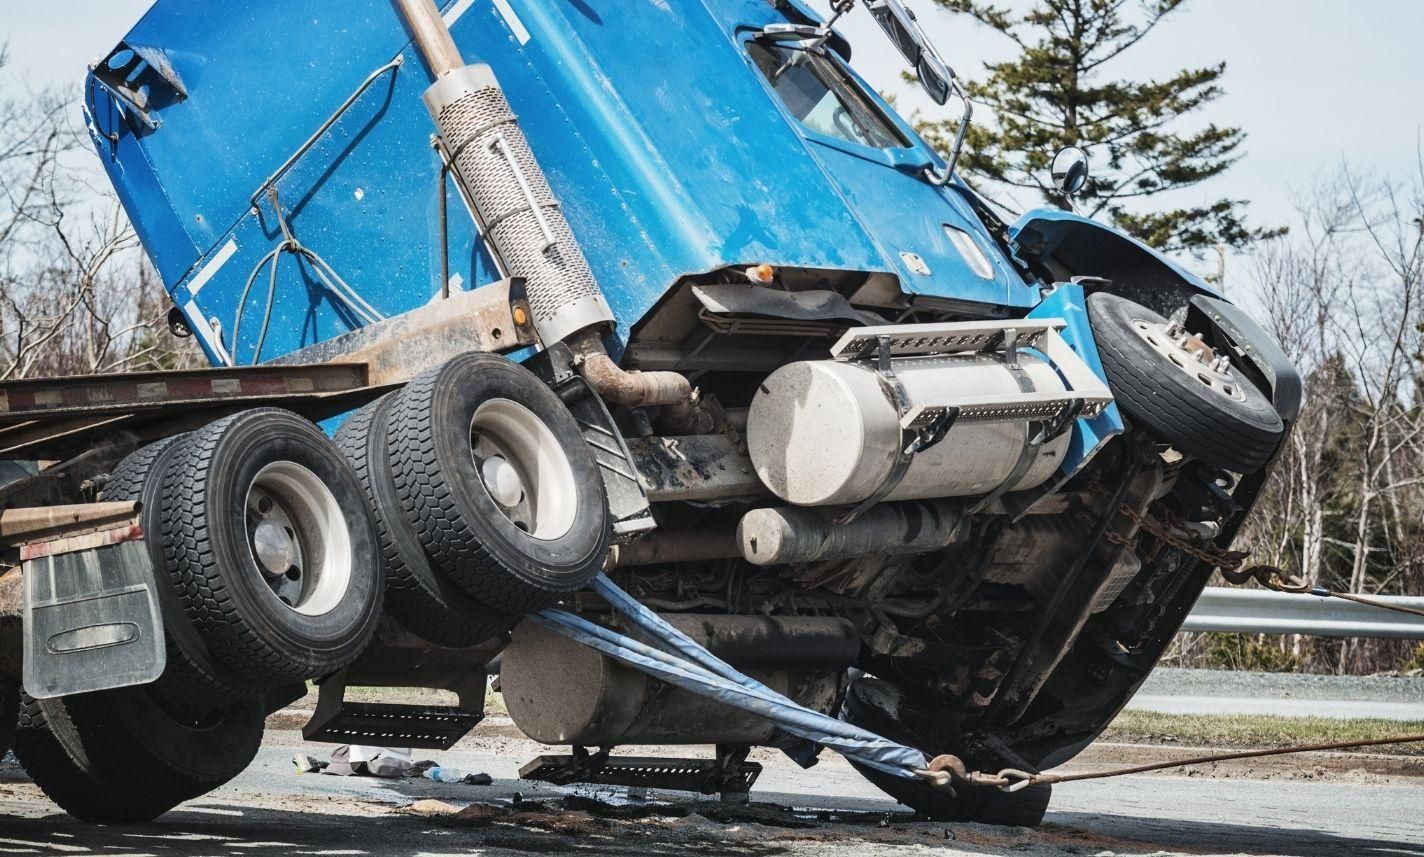 union-point-commercial-truck-accident-injury-lawyer